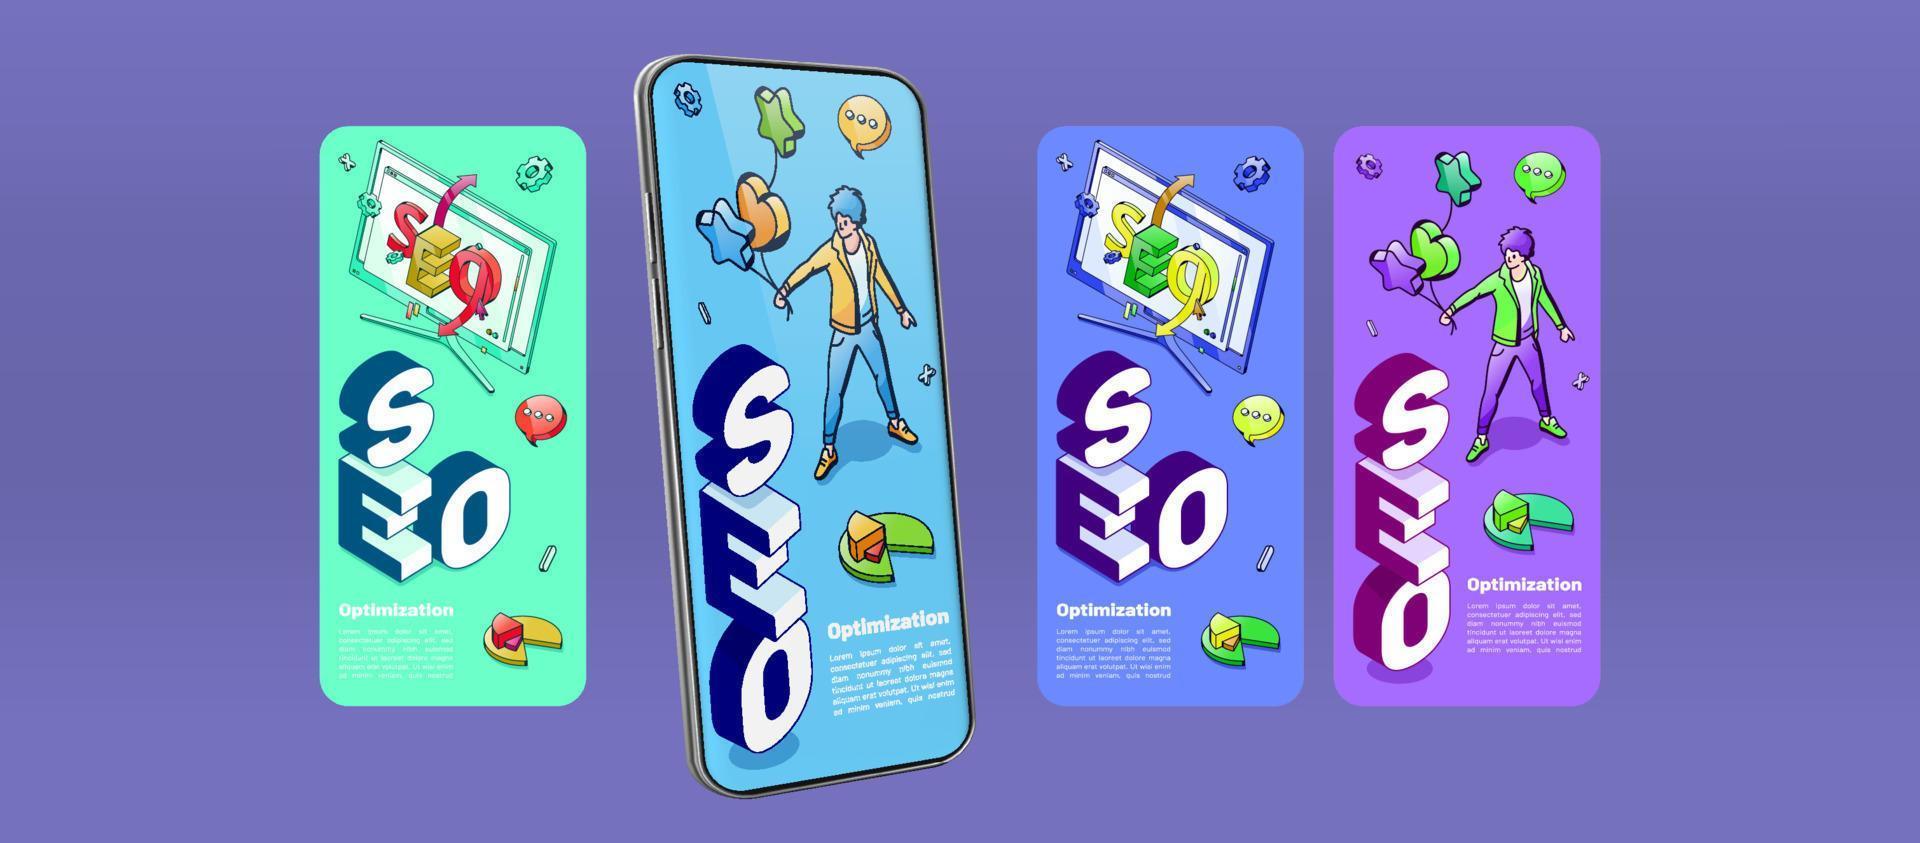 SEO optimization banners for mobile phone app vector